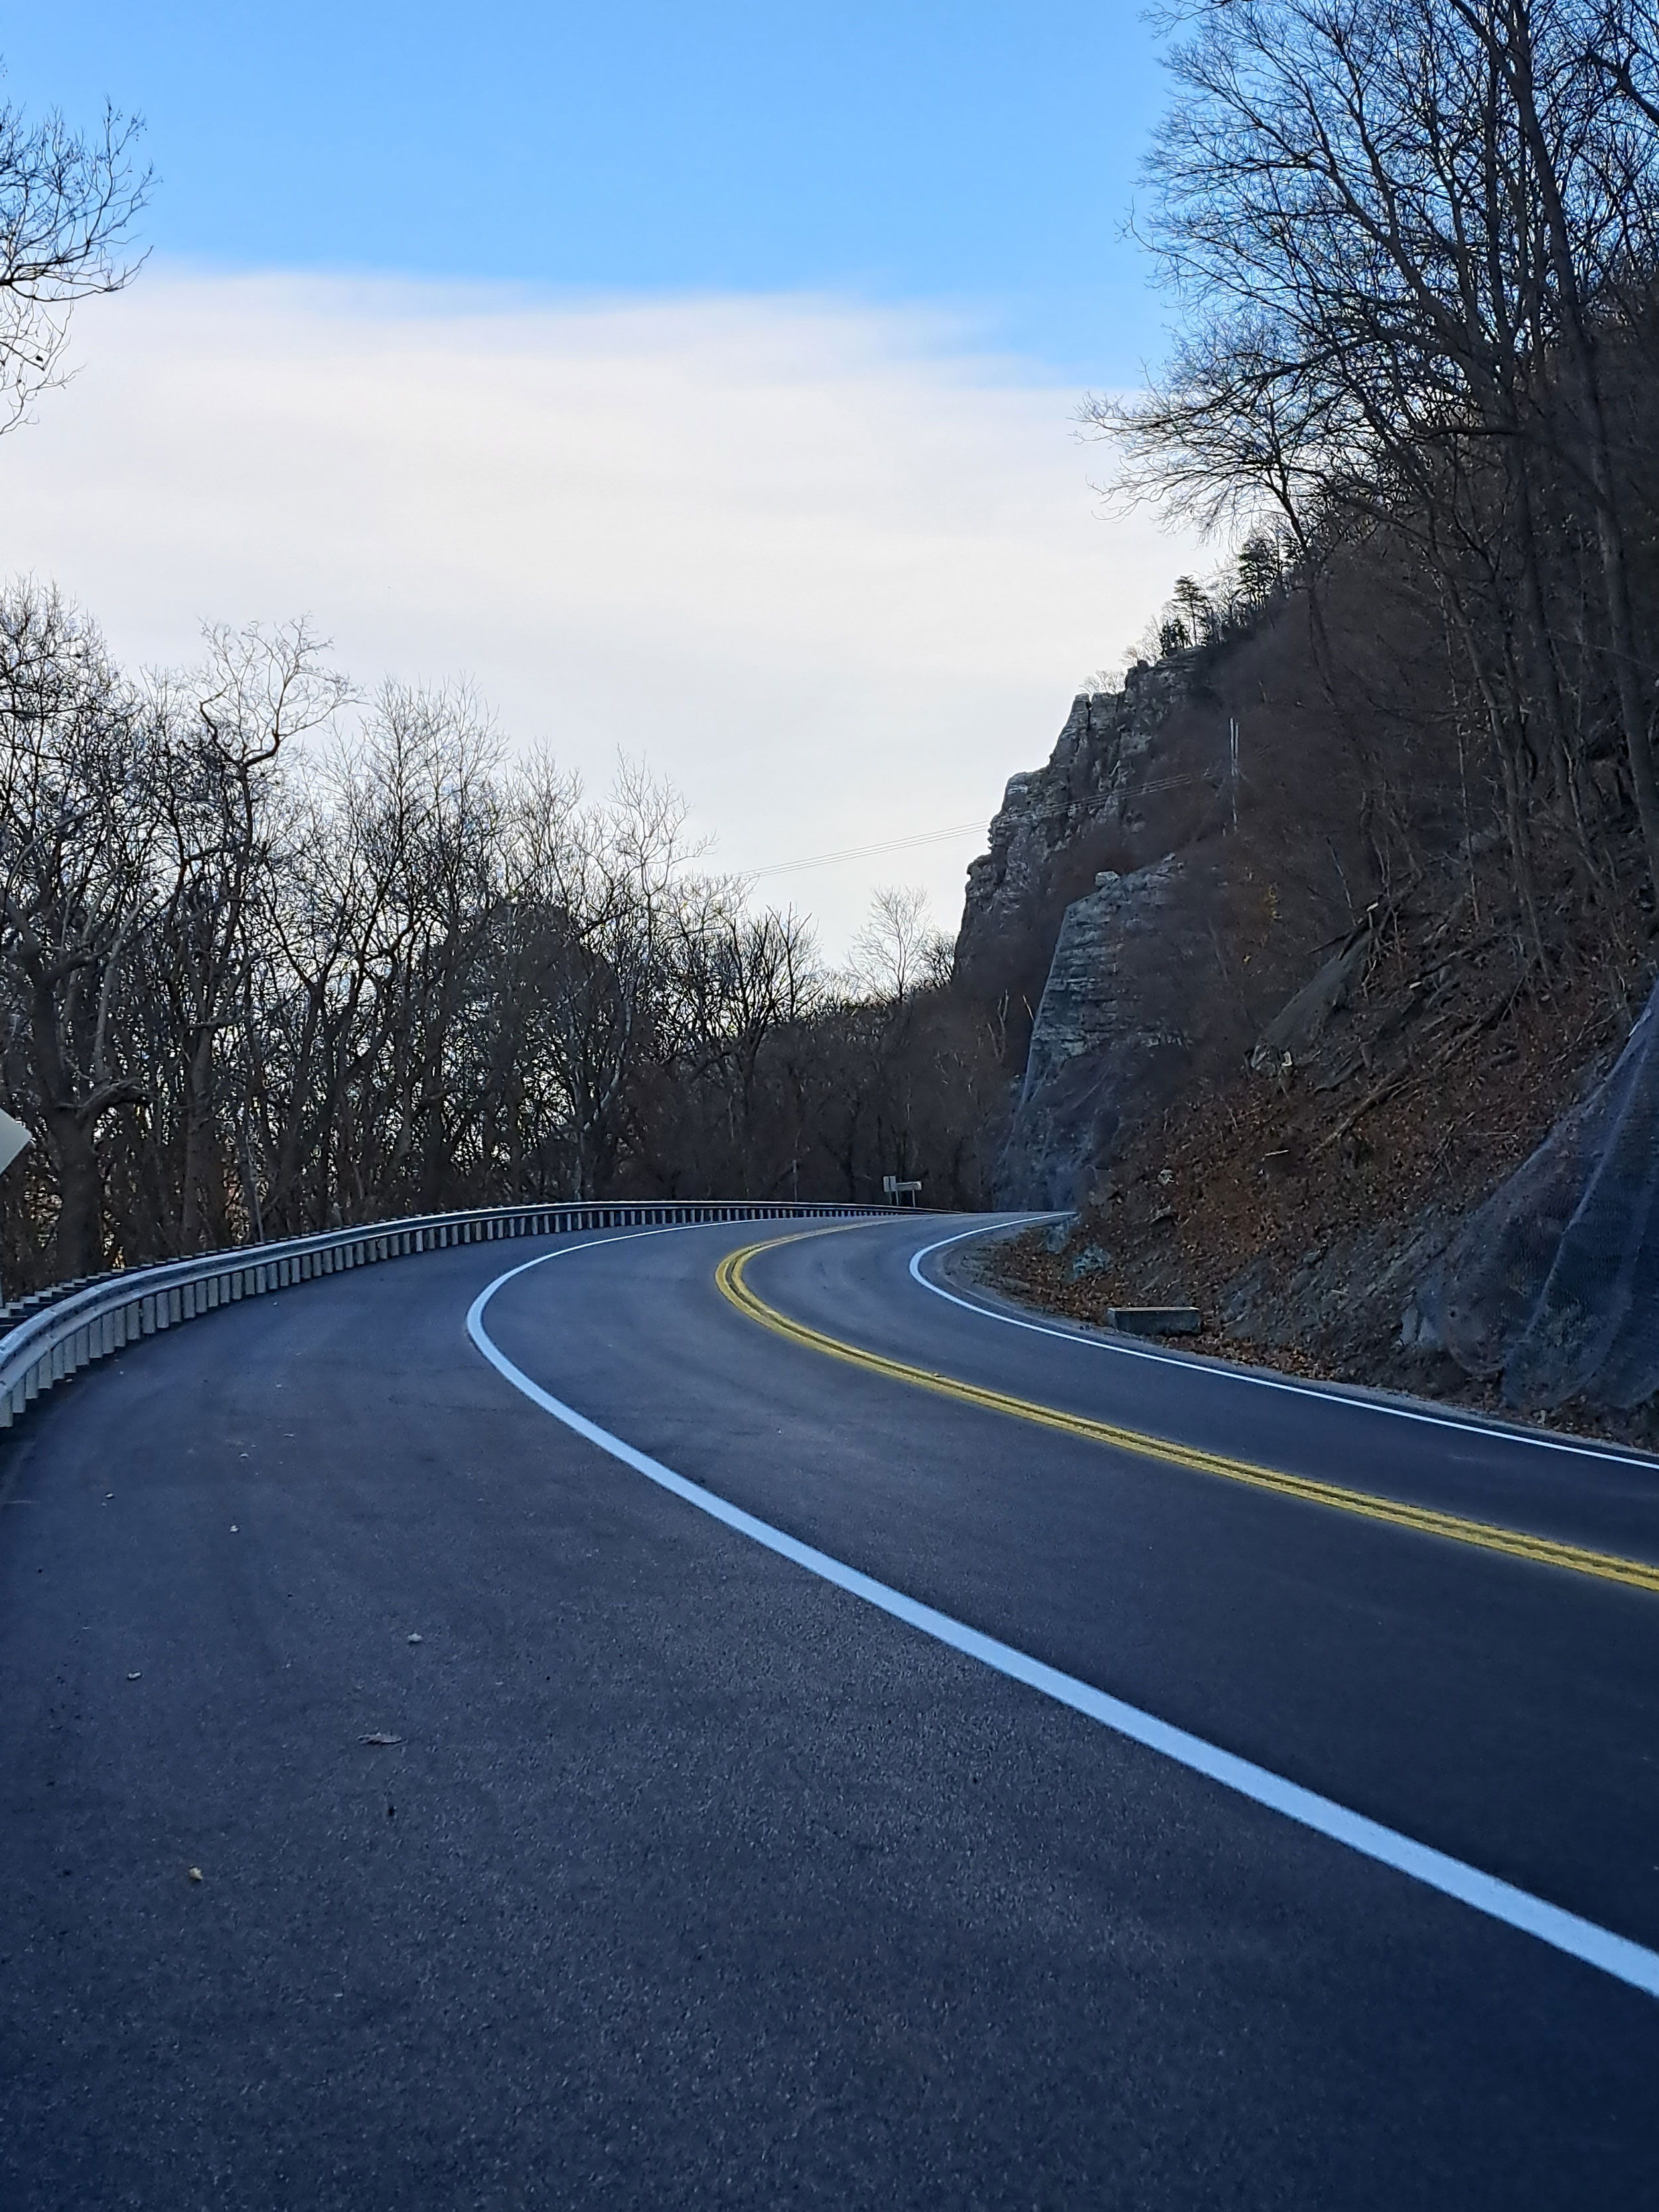 View of completed US 340 Rock Slide Remediation project.  Project includes new paved, paved shoulders, guardrail, and rumble strips.